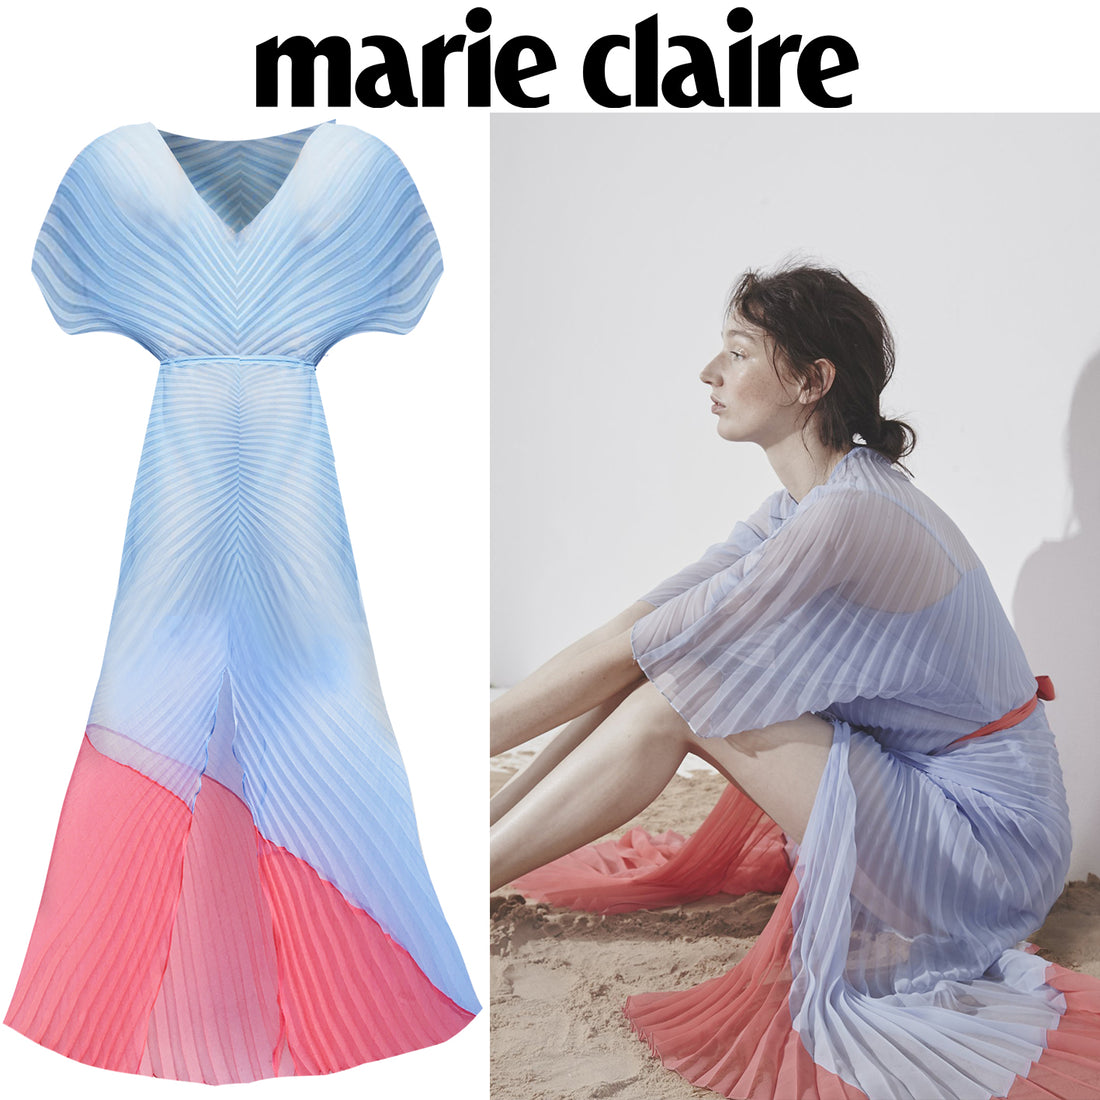 SS18 Tropic Kaftan featured on Marie Claire's Hot list